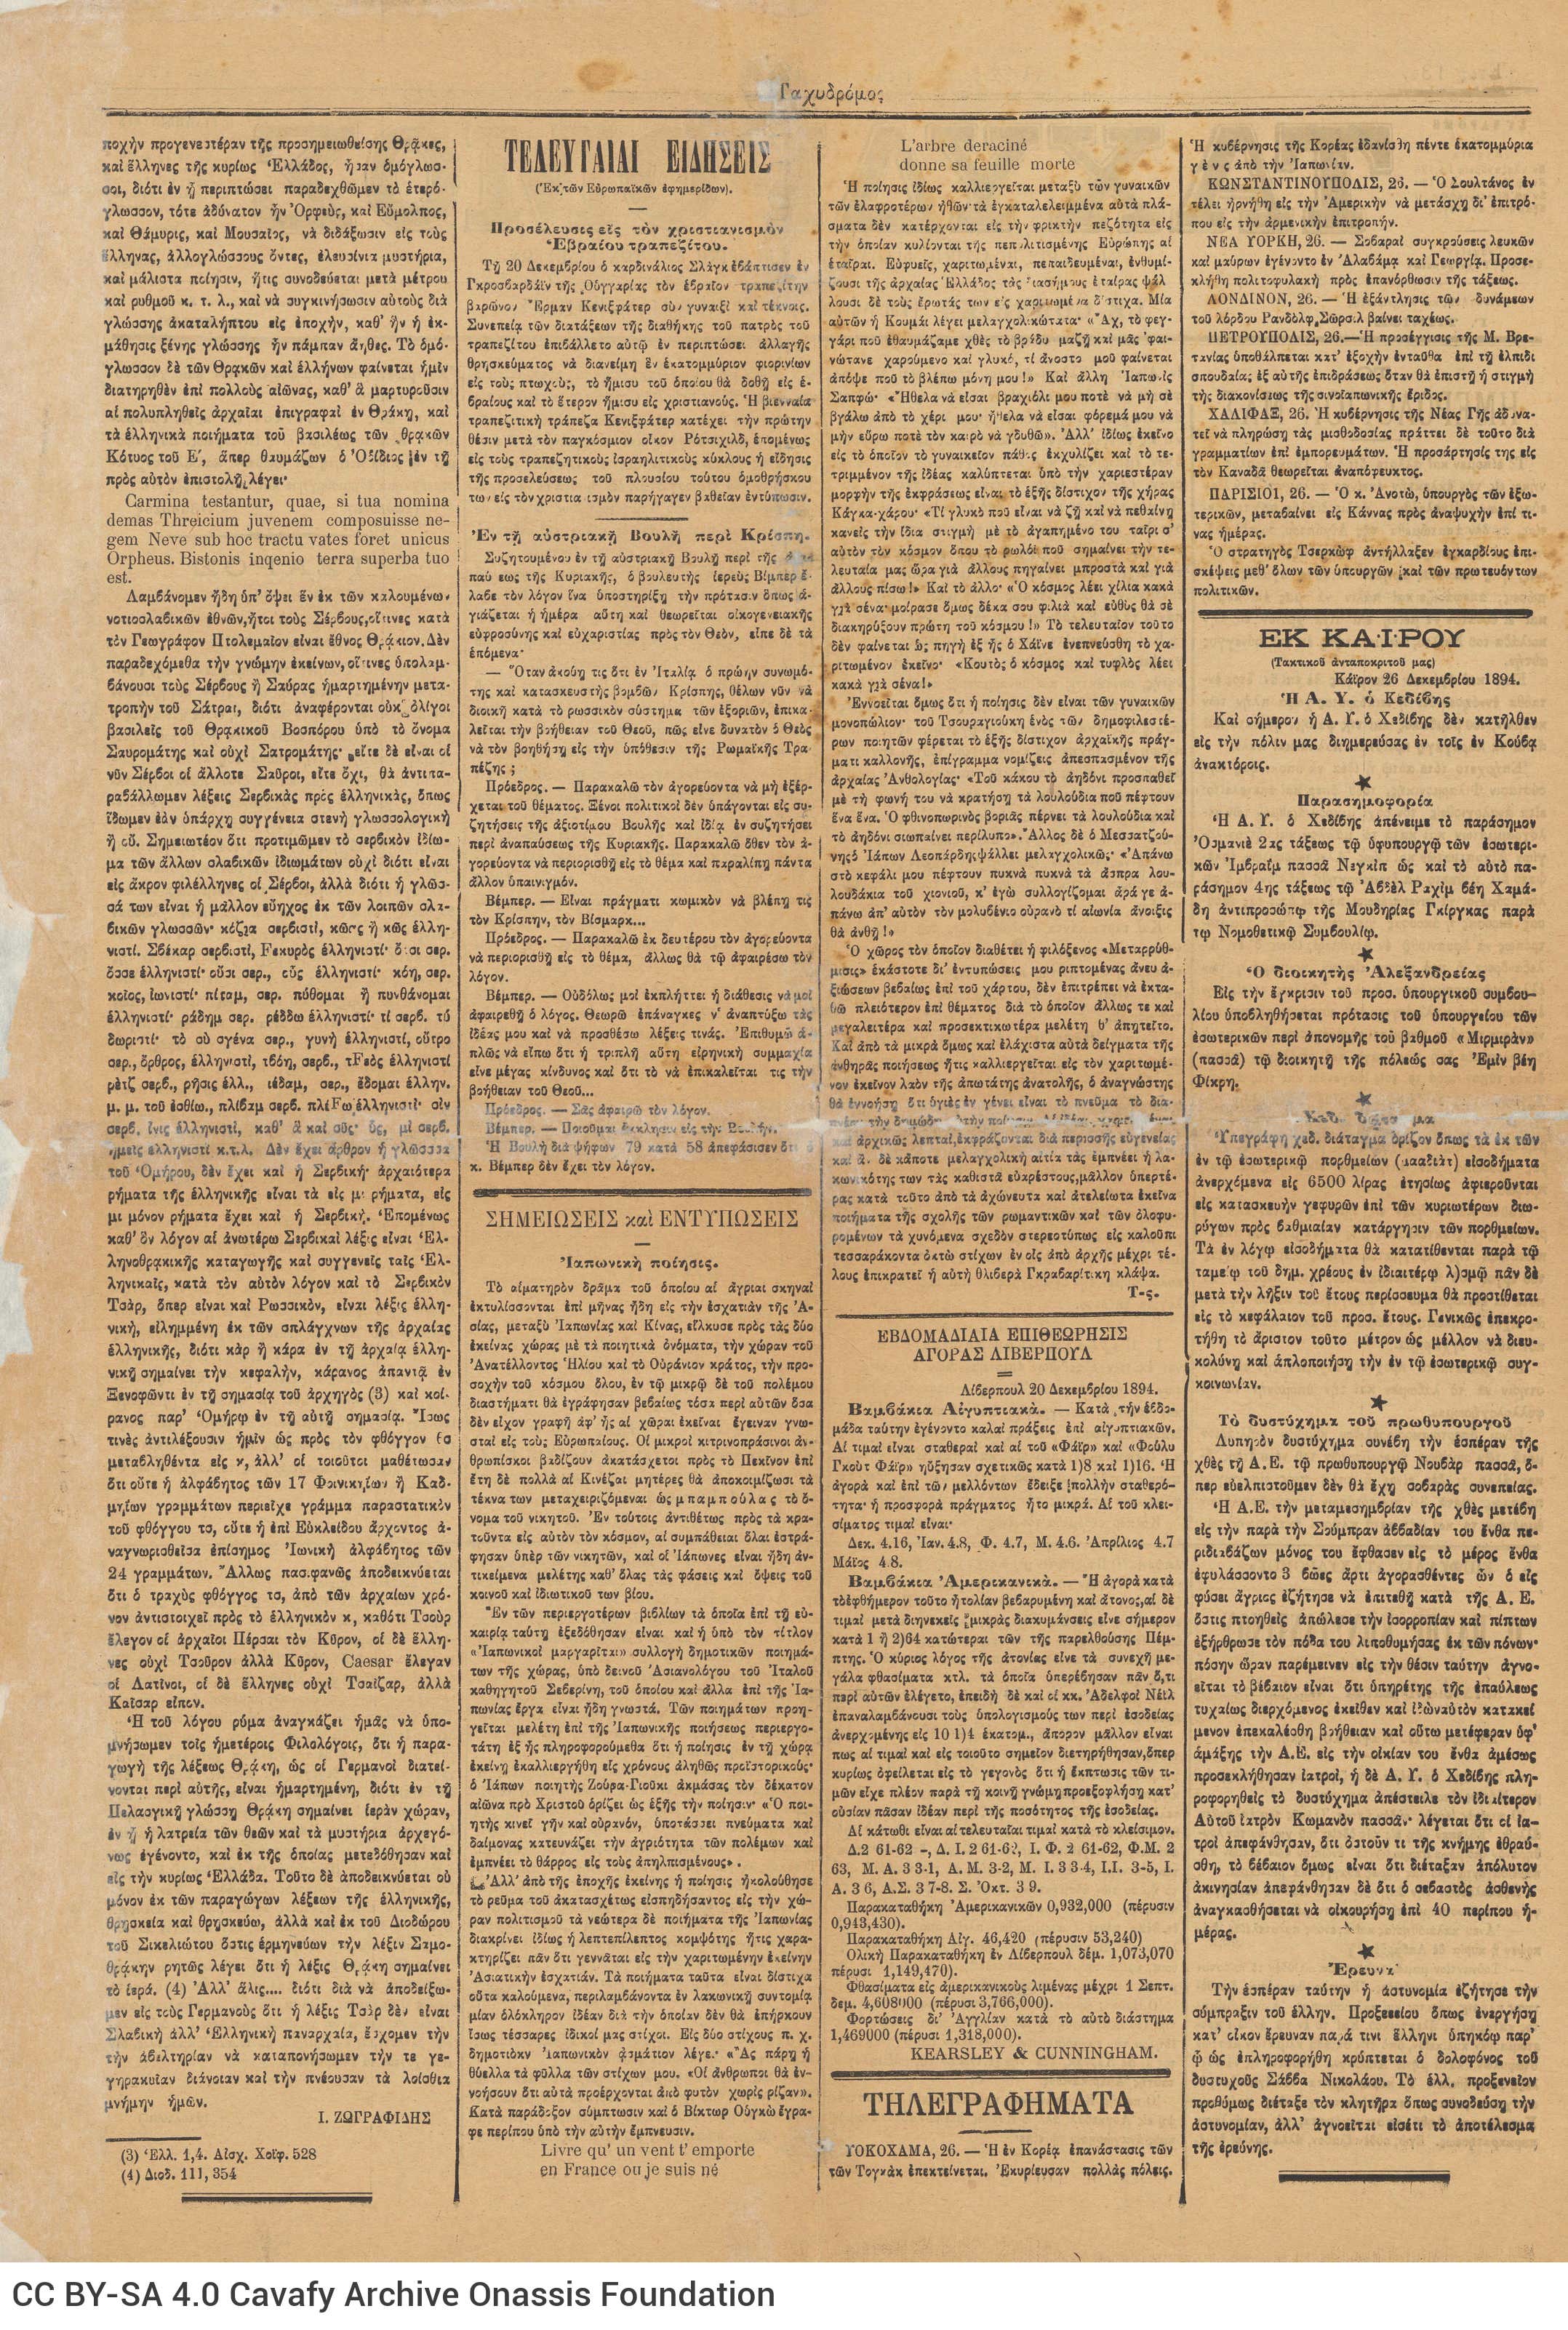 Issue of the newspaper *Tachydromos* of Alexandria.